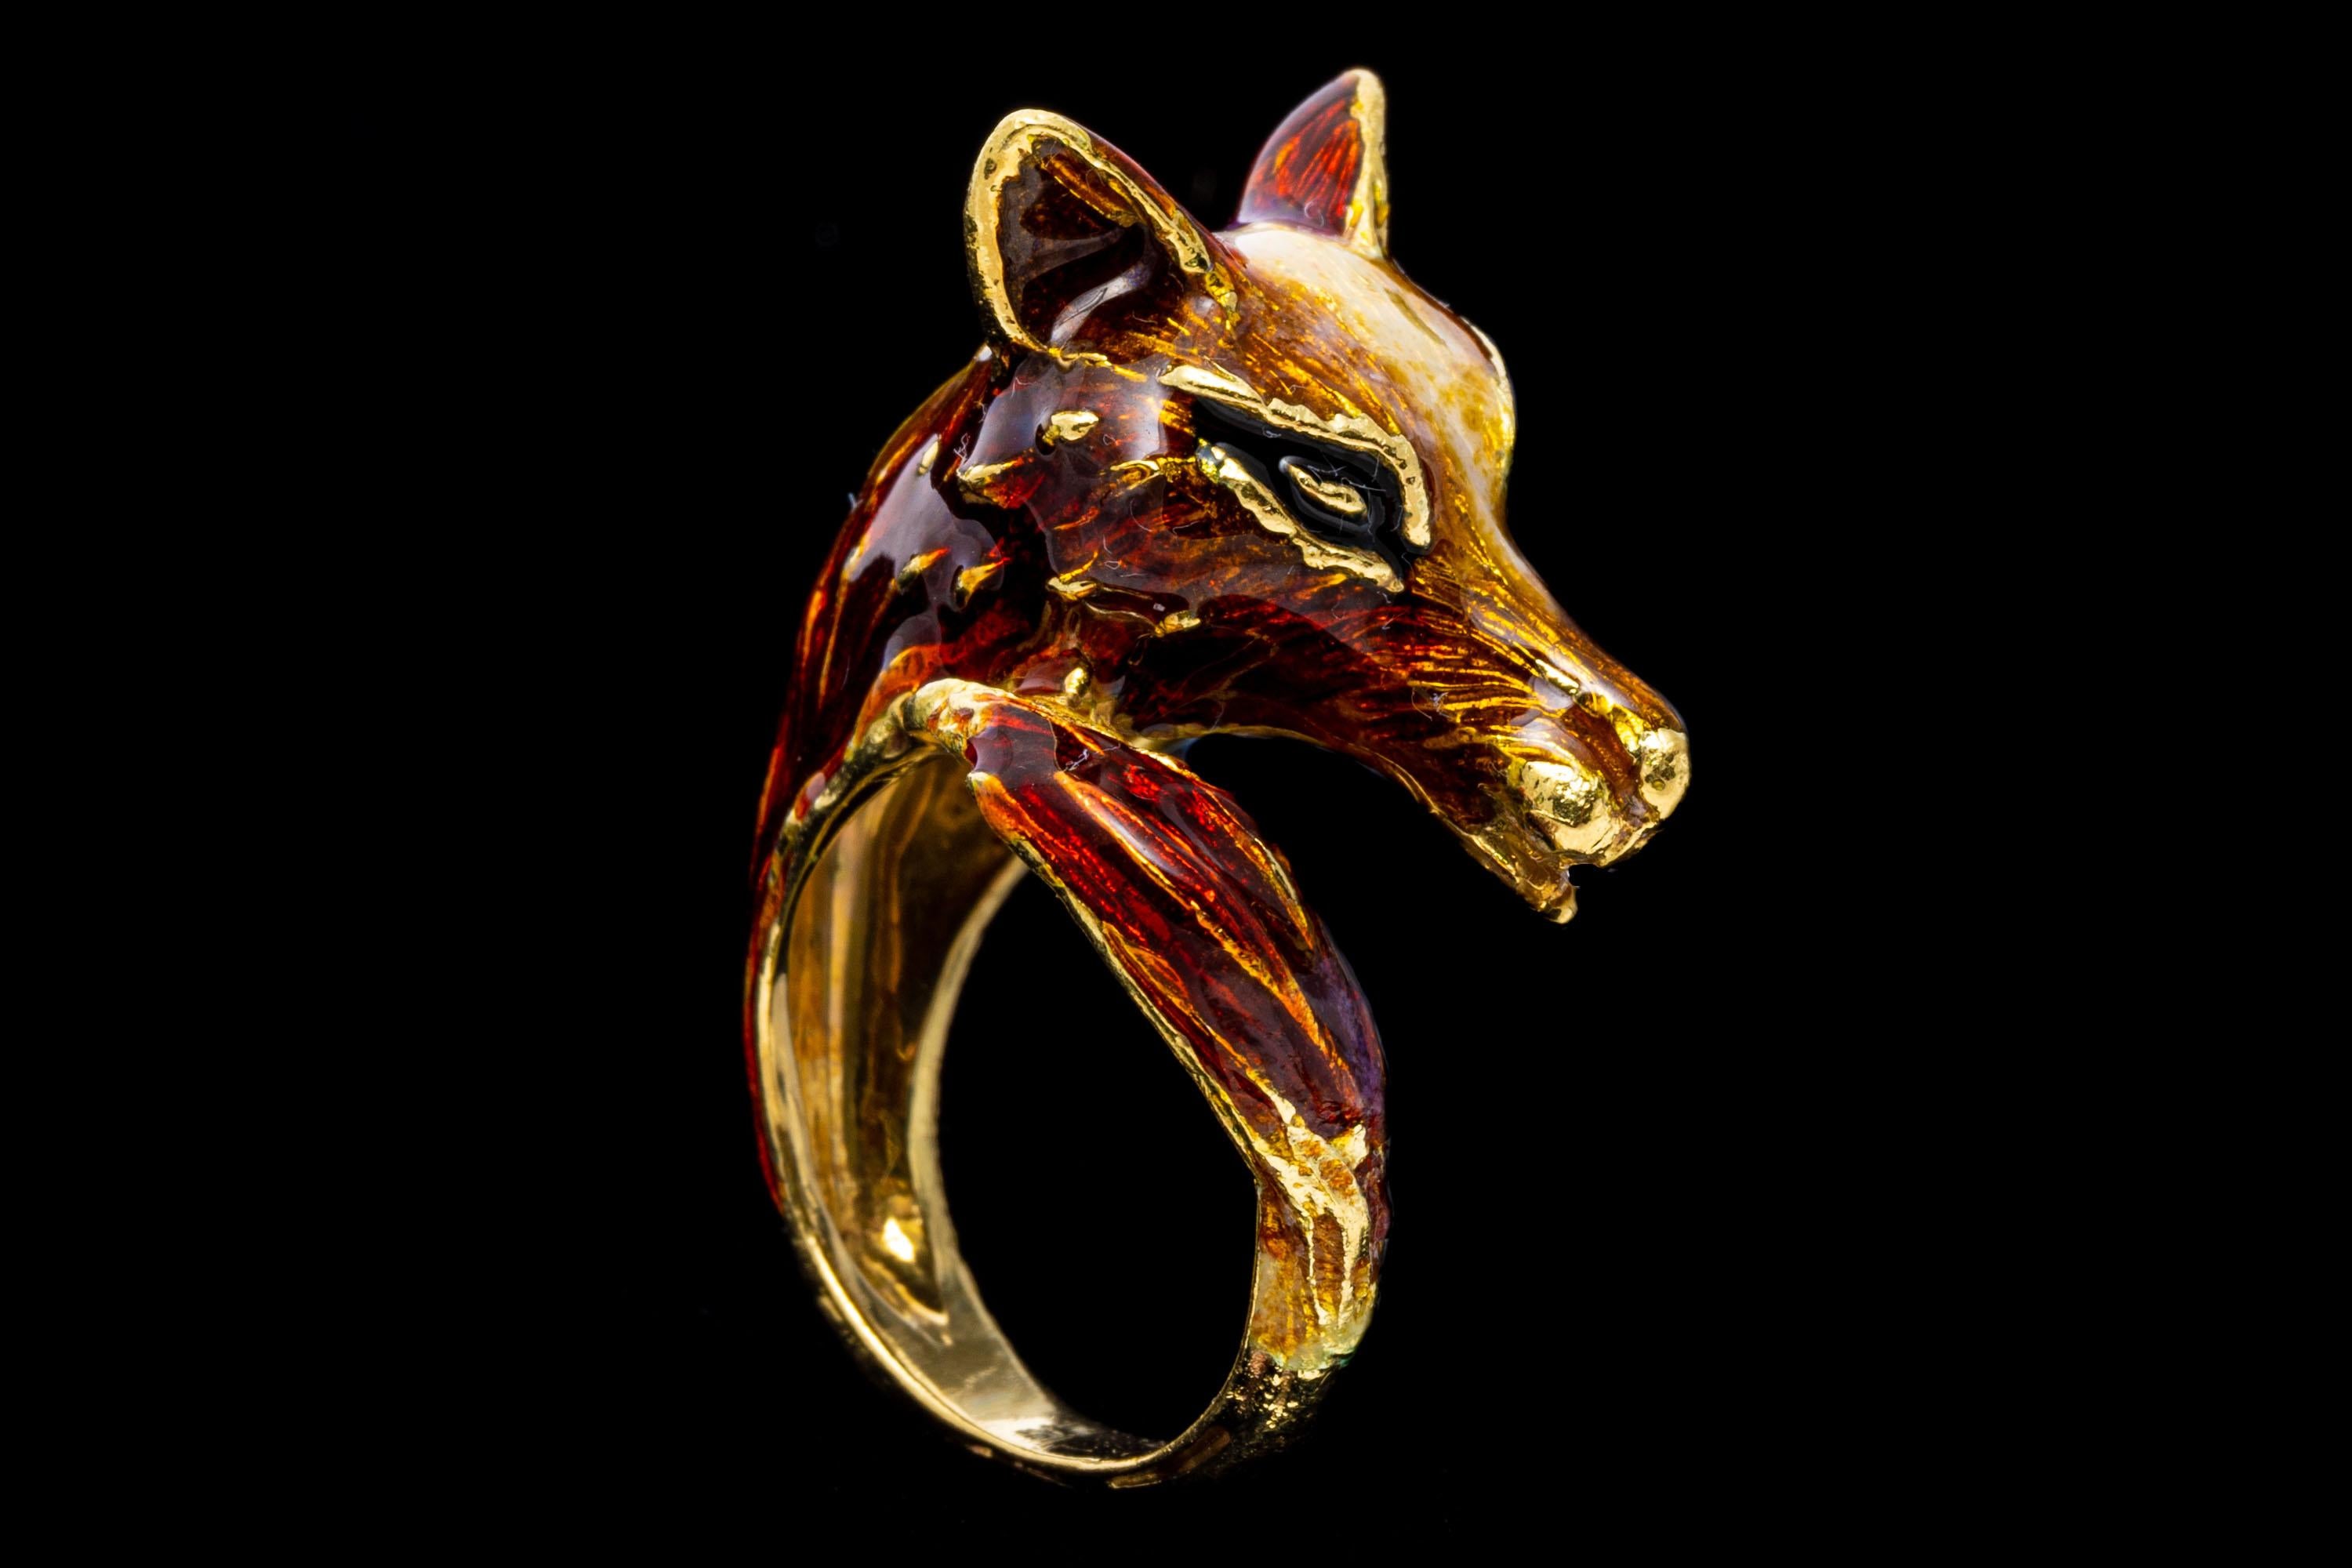 18k yellow gold ring. This unique ring is a yellow gold center figural fox head that curls back on itself to the tail, set with a reddish brown color enamel and decorated with a white enamel striped head.
Marks: 750
Dimensions: 7.8